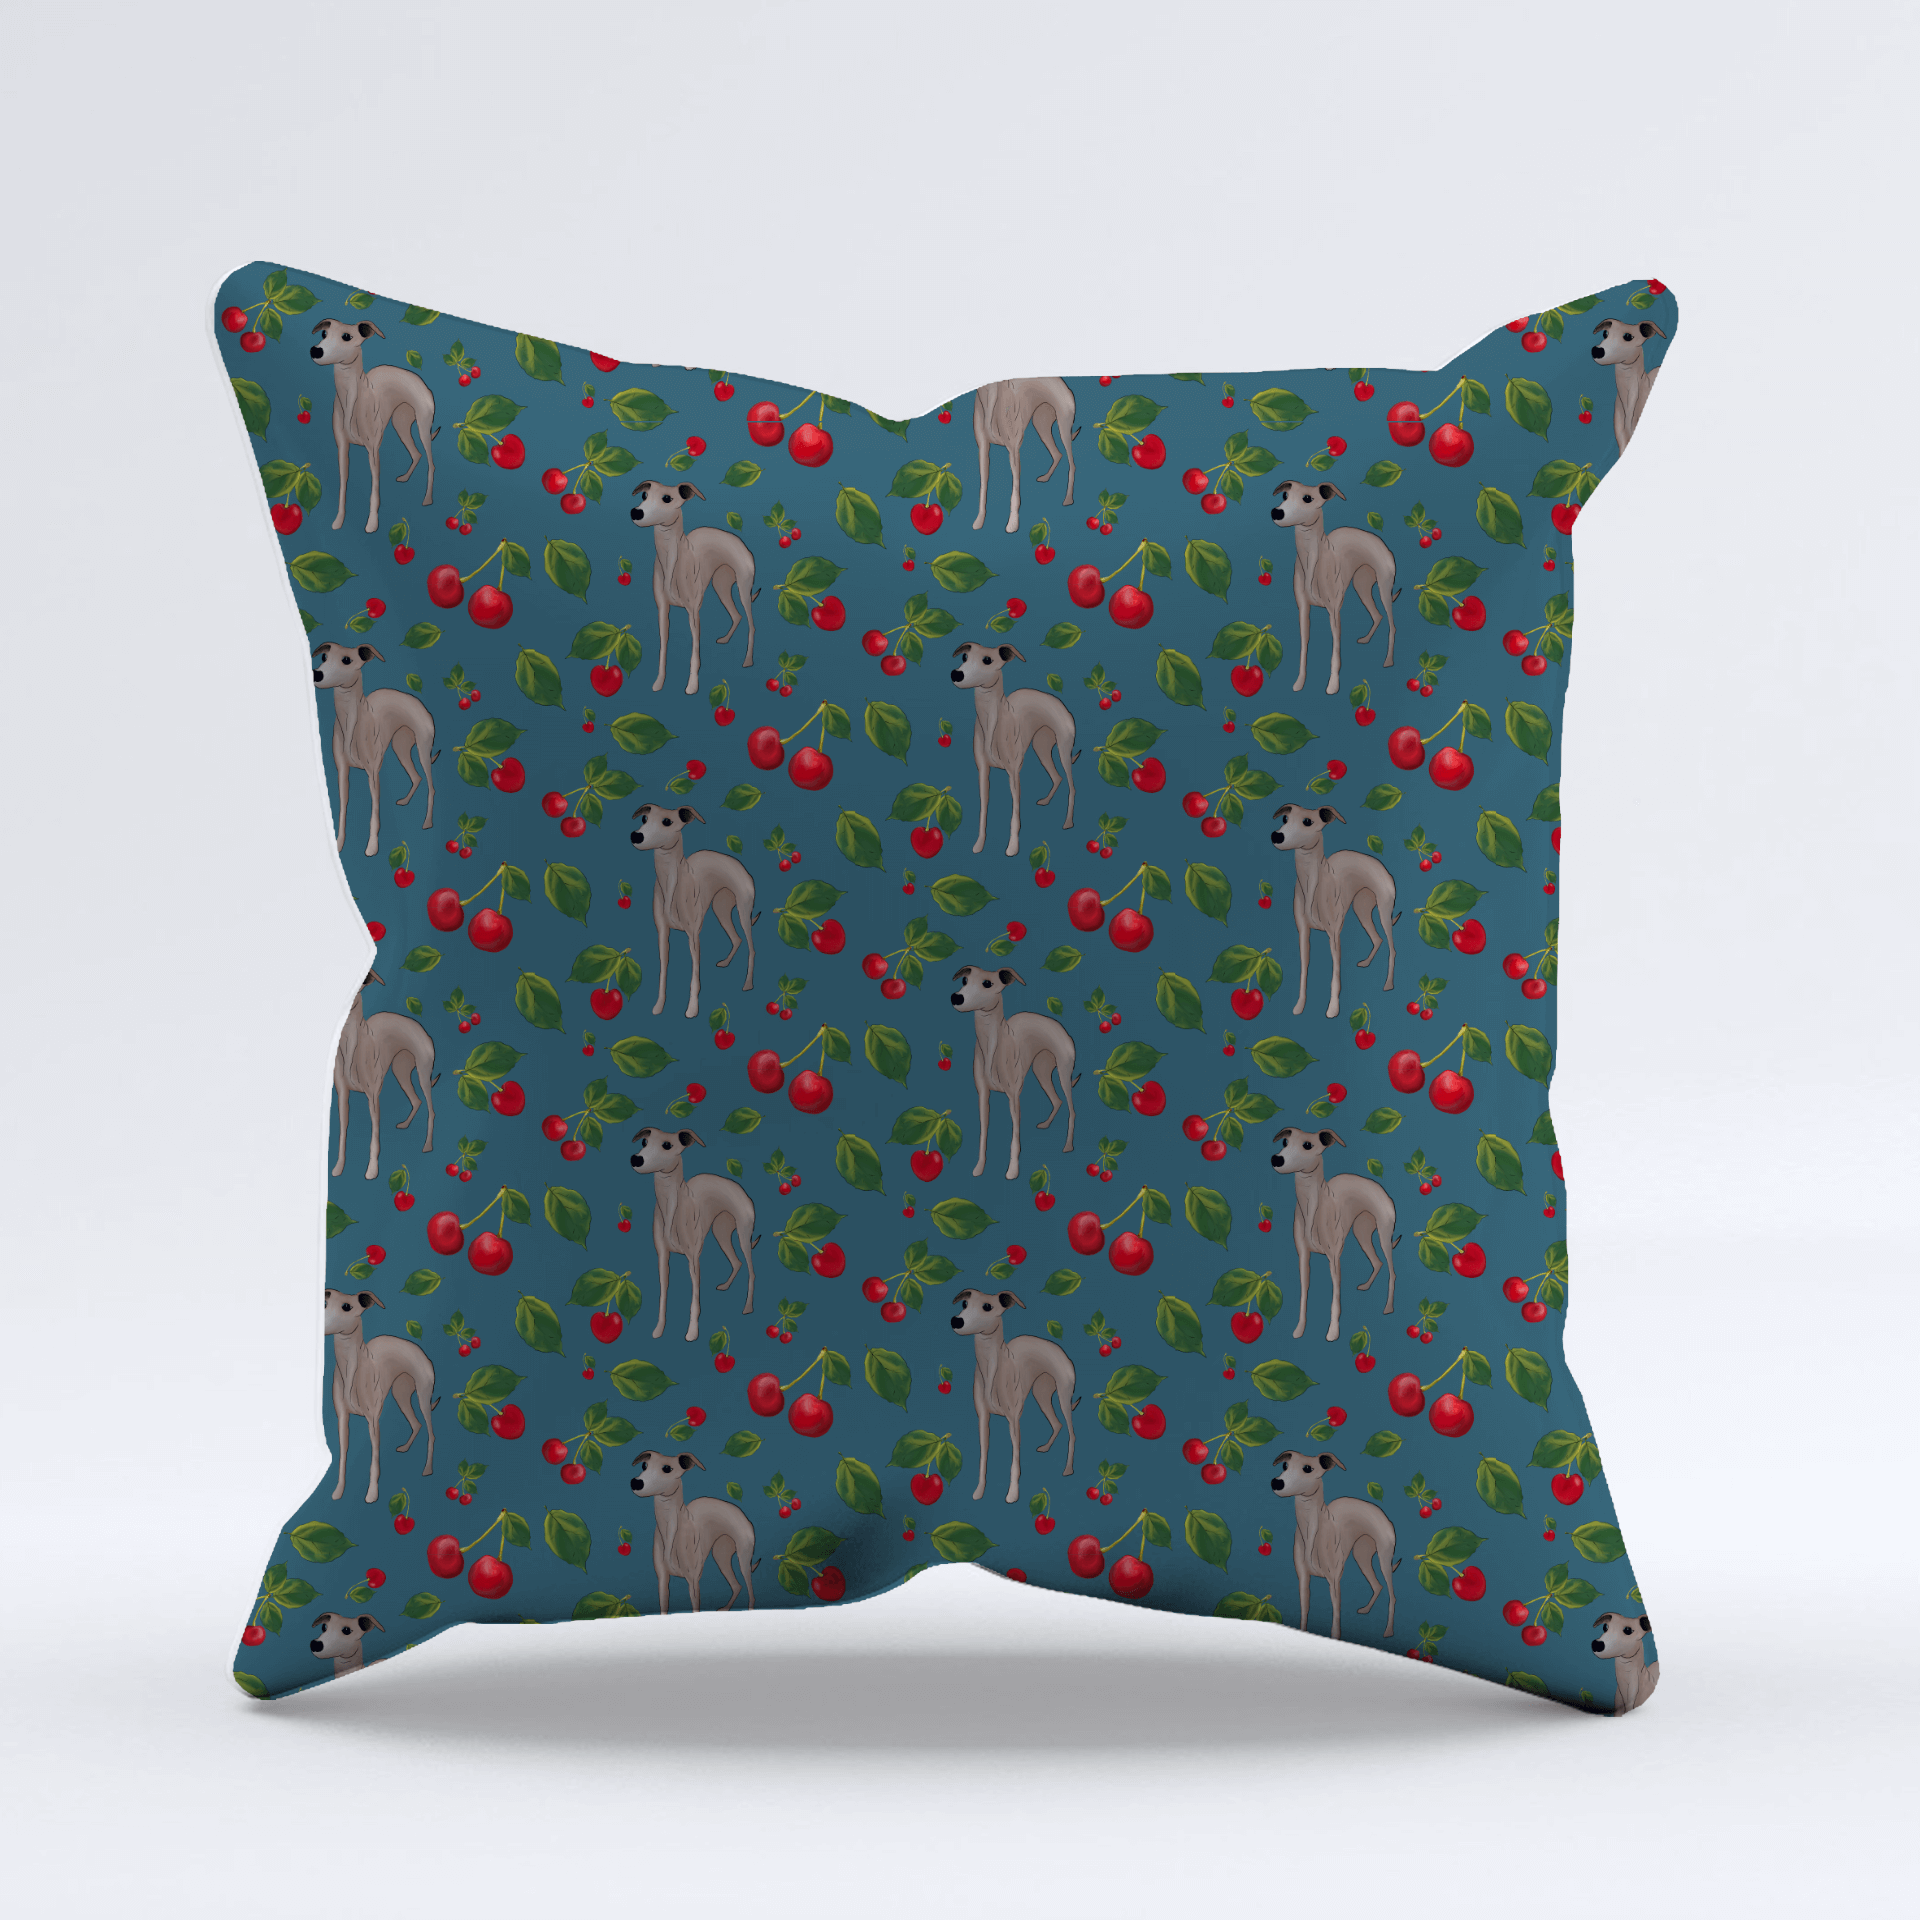 Cherry and Hound cushion cover